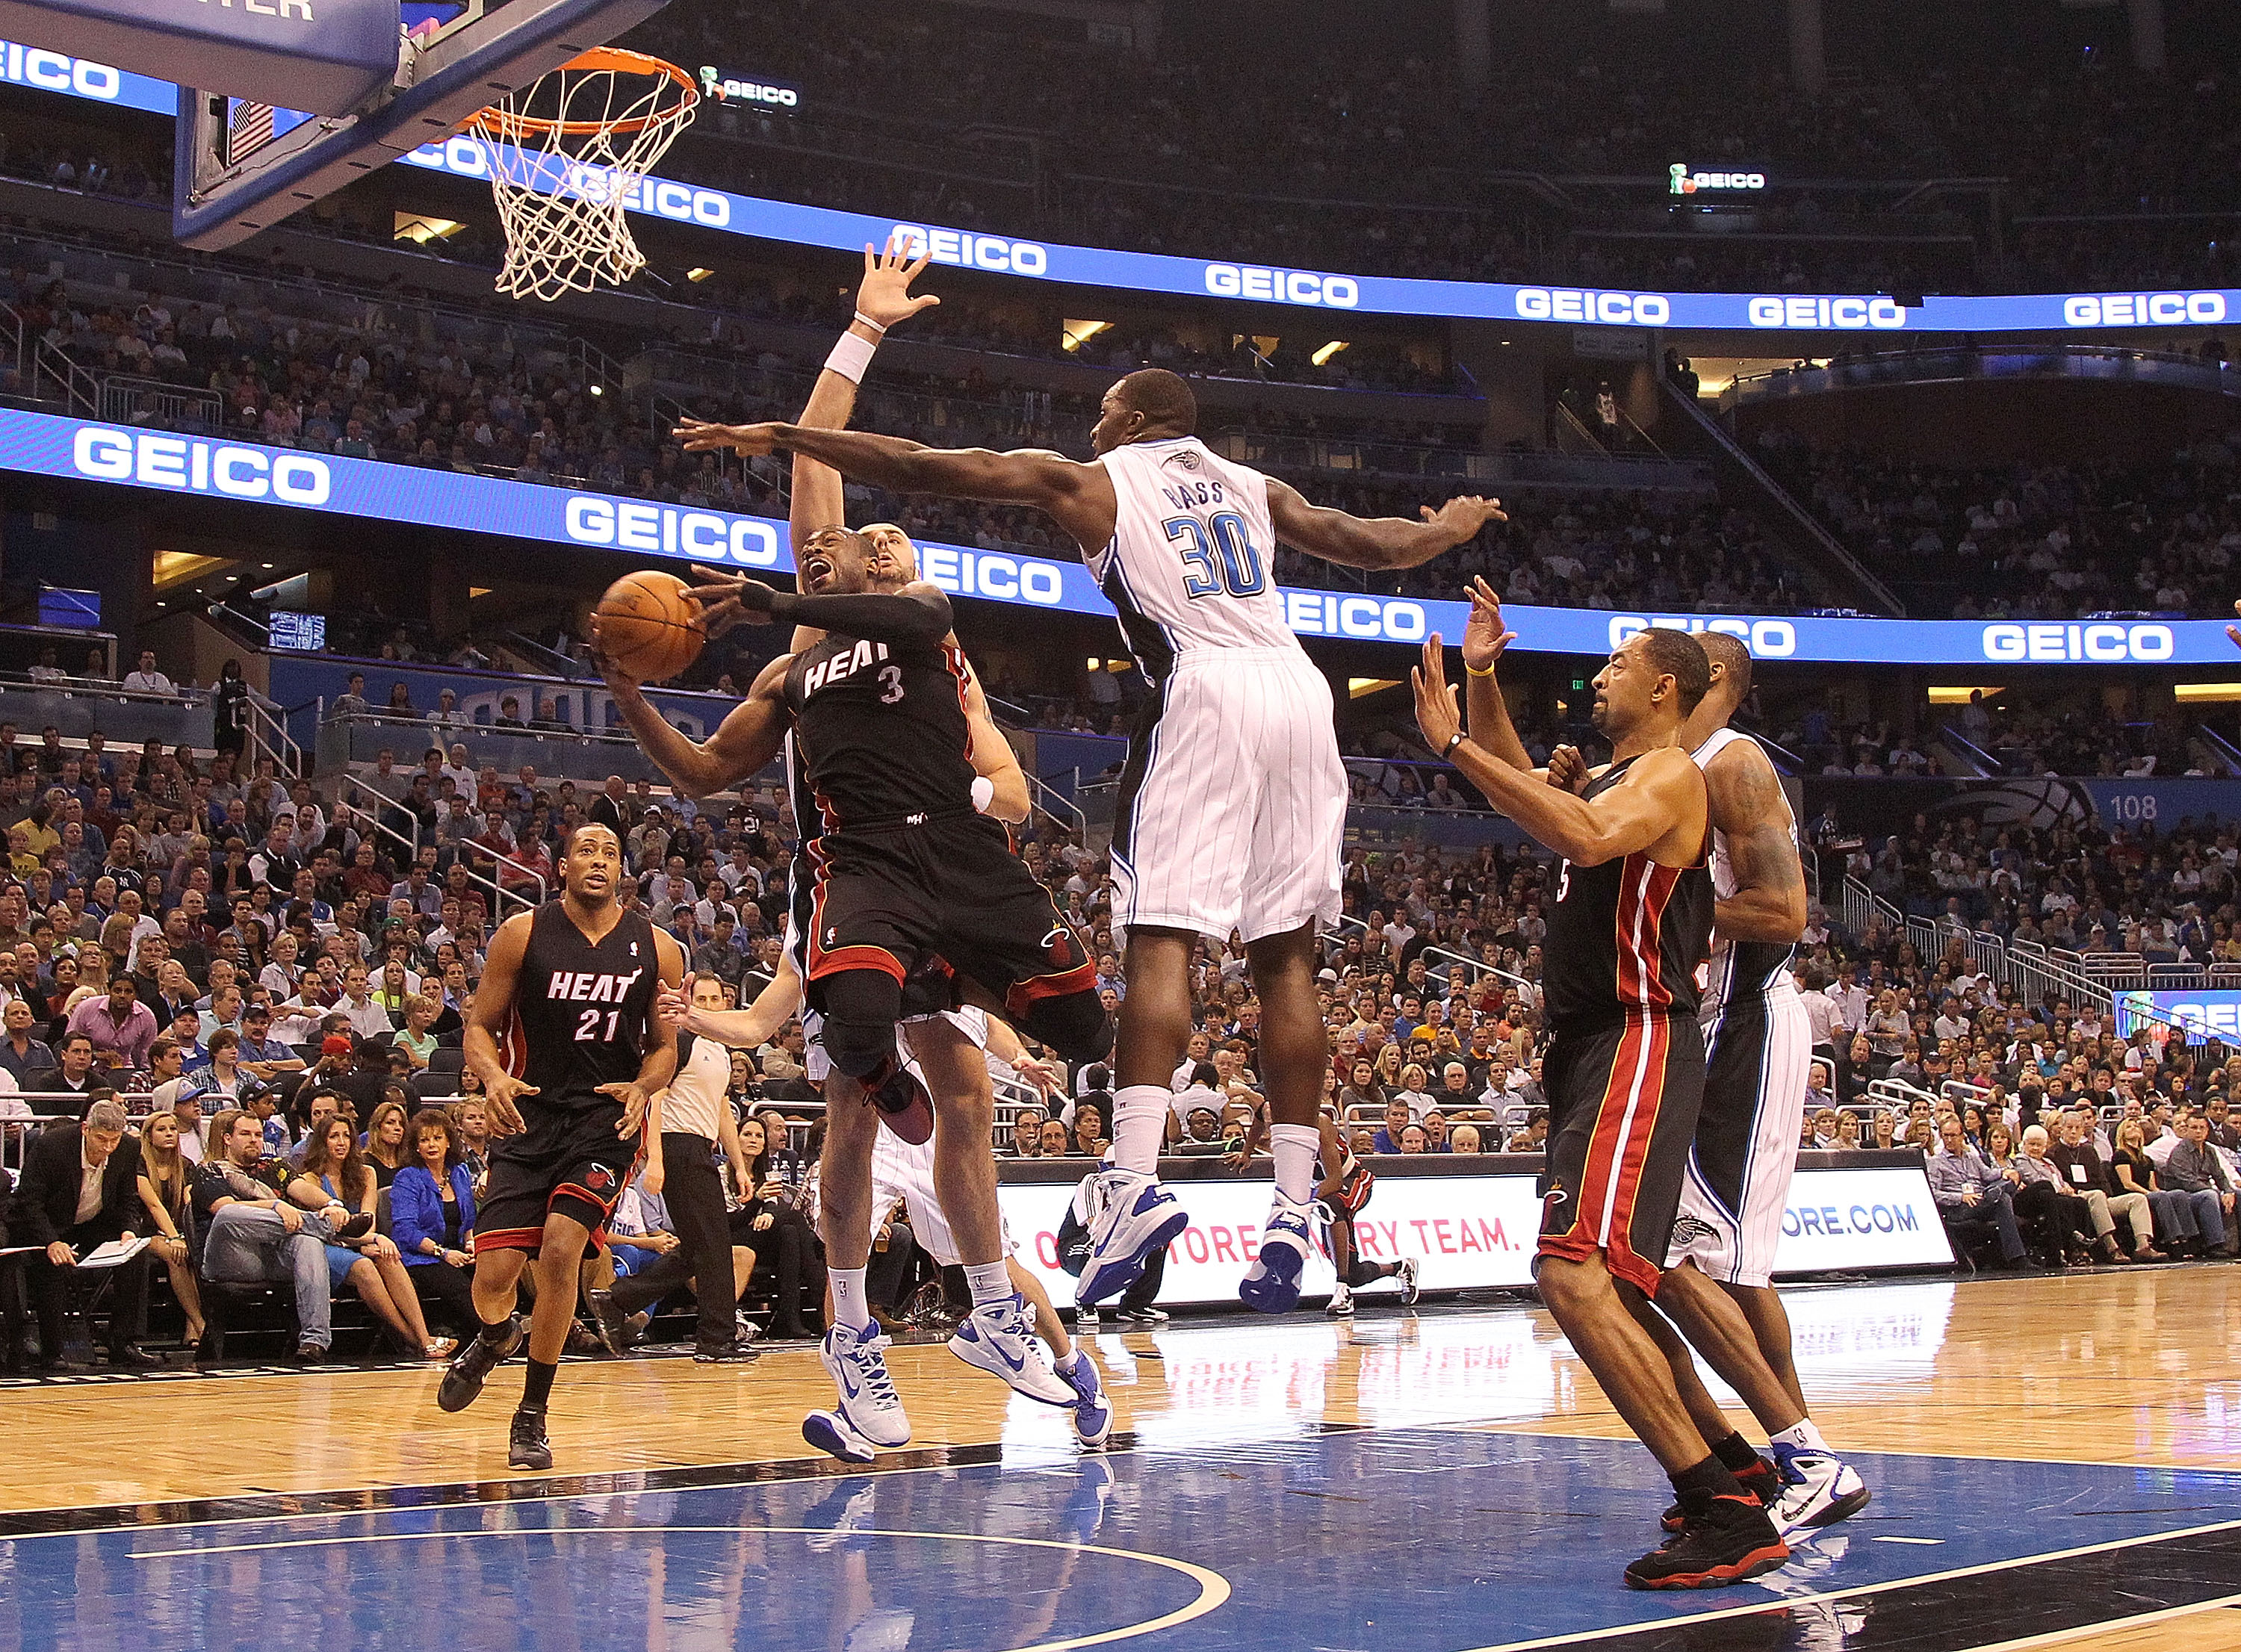 ORLANDO, FL - NOVEMBER 24:  Dwyane Wade #3 of the Miami Heat shoots over Brandon Bass #30 of the Orlando Magic during a game at Amway Arena on November 24, 2010 in Orlando, Florida. NOTE TO USER: User expressly acknowledges and agrees that, by downloading